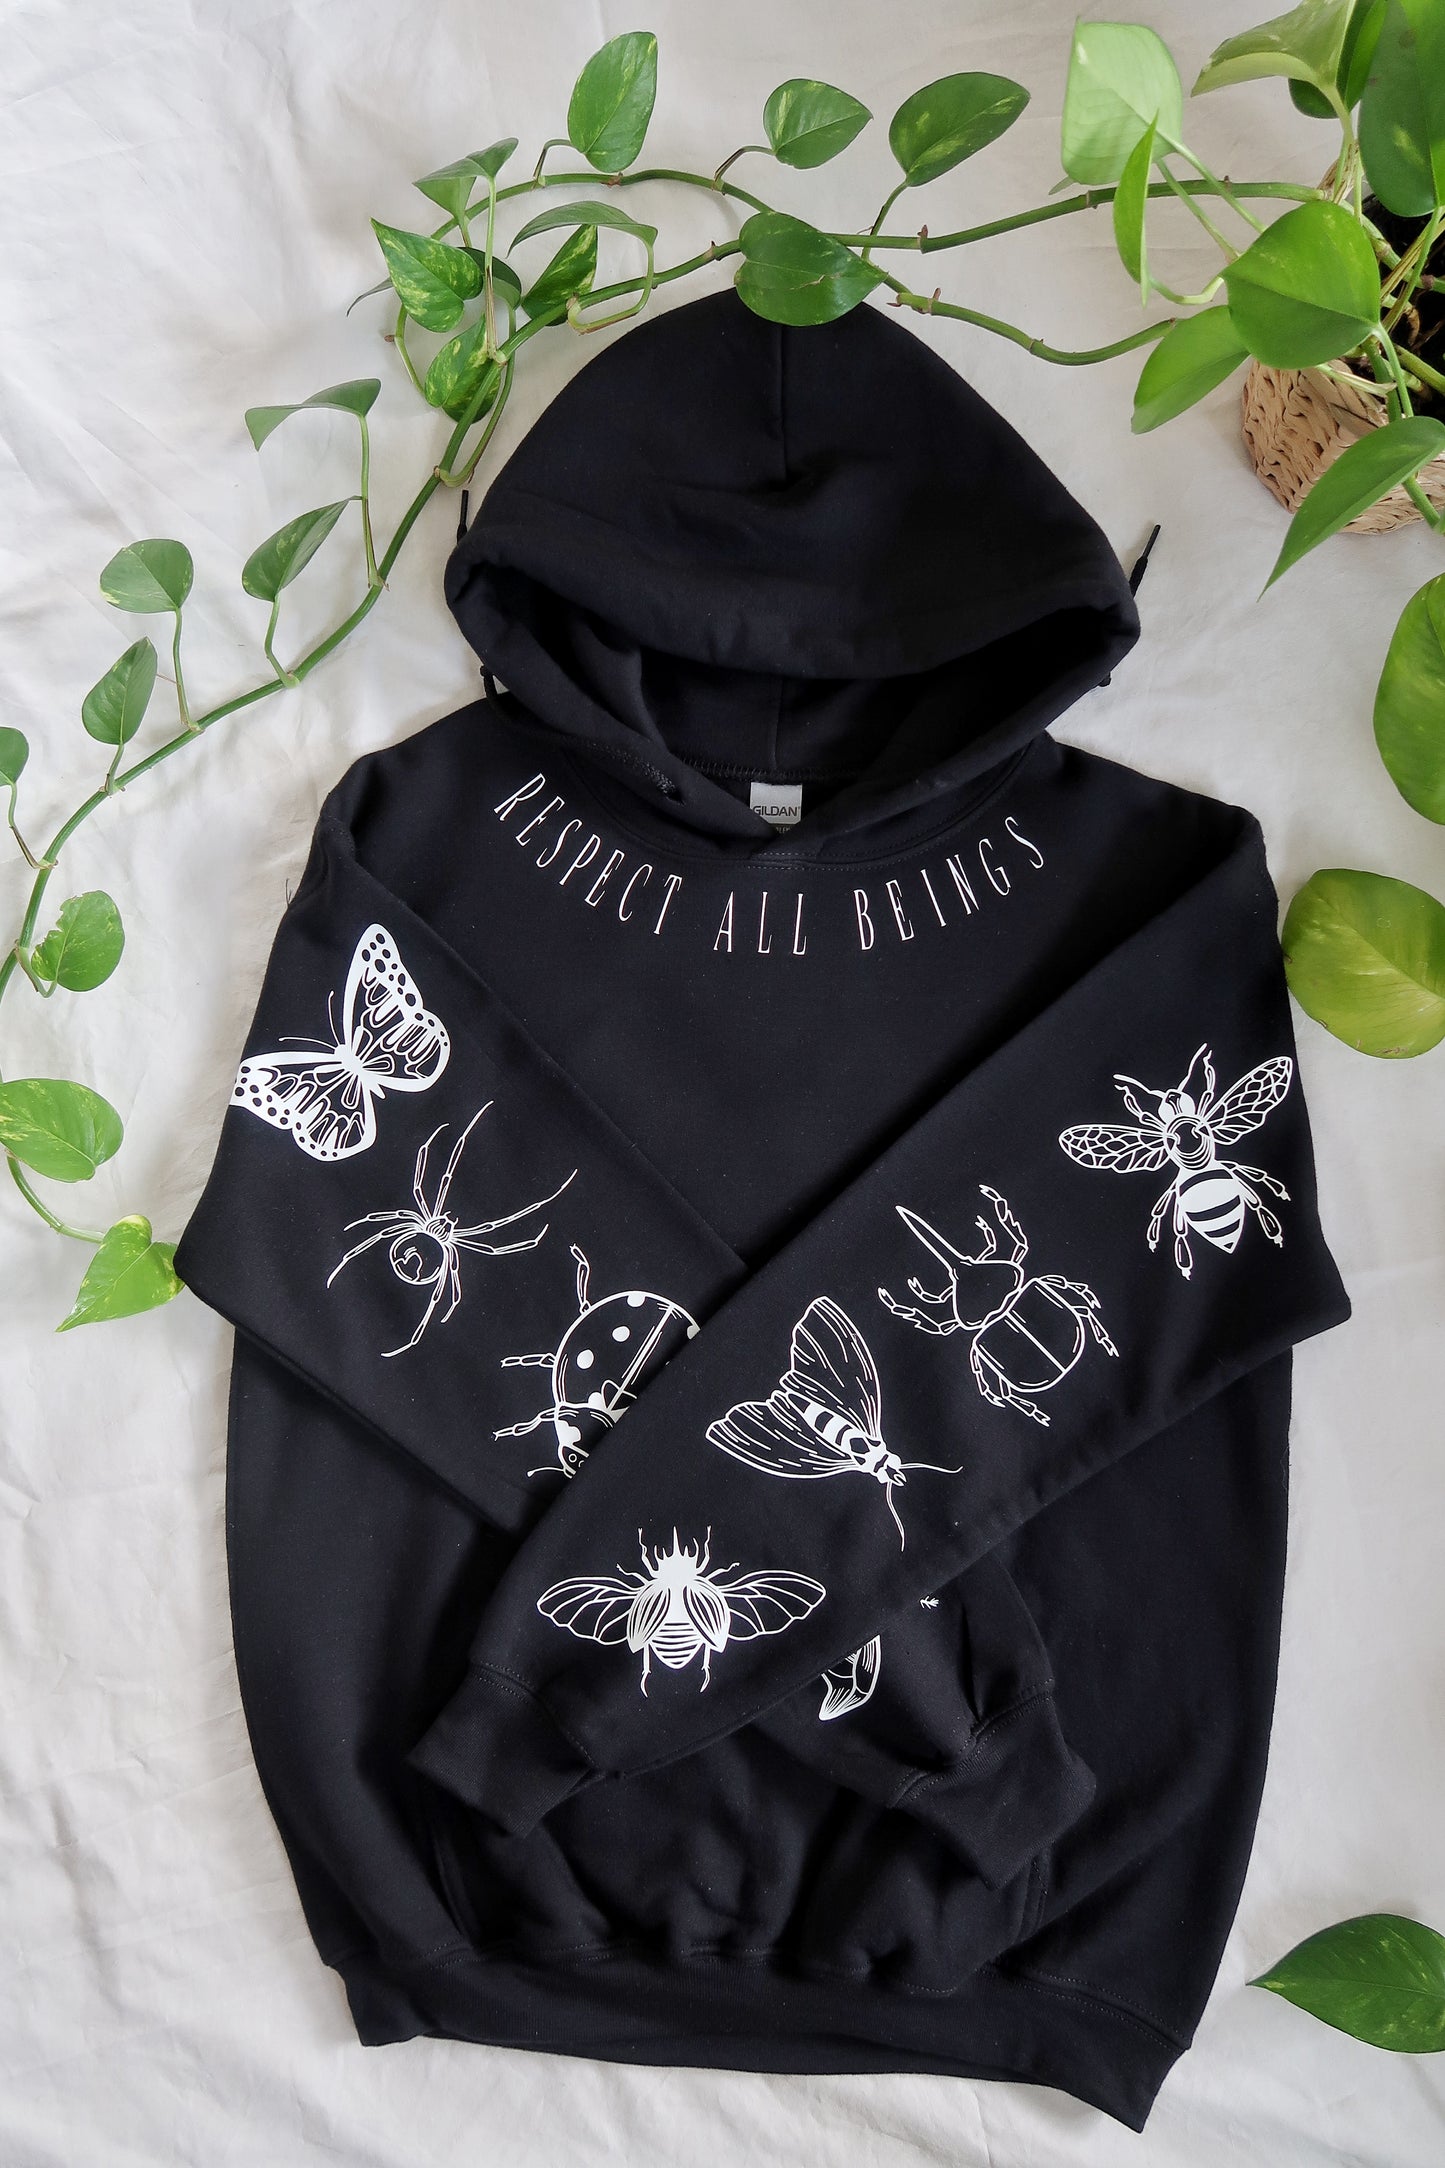 Insect "Respect for All" Unisex Hoodie